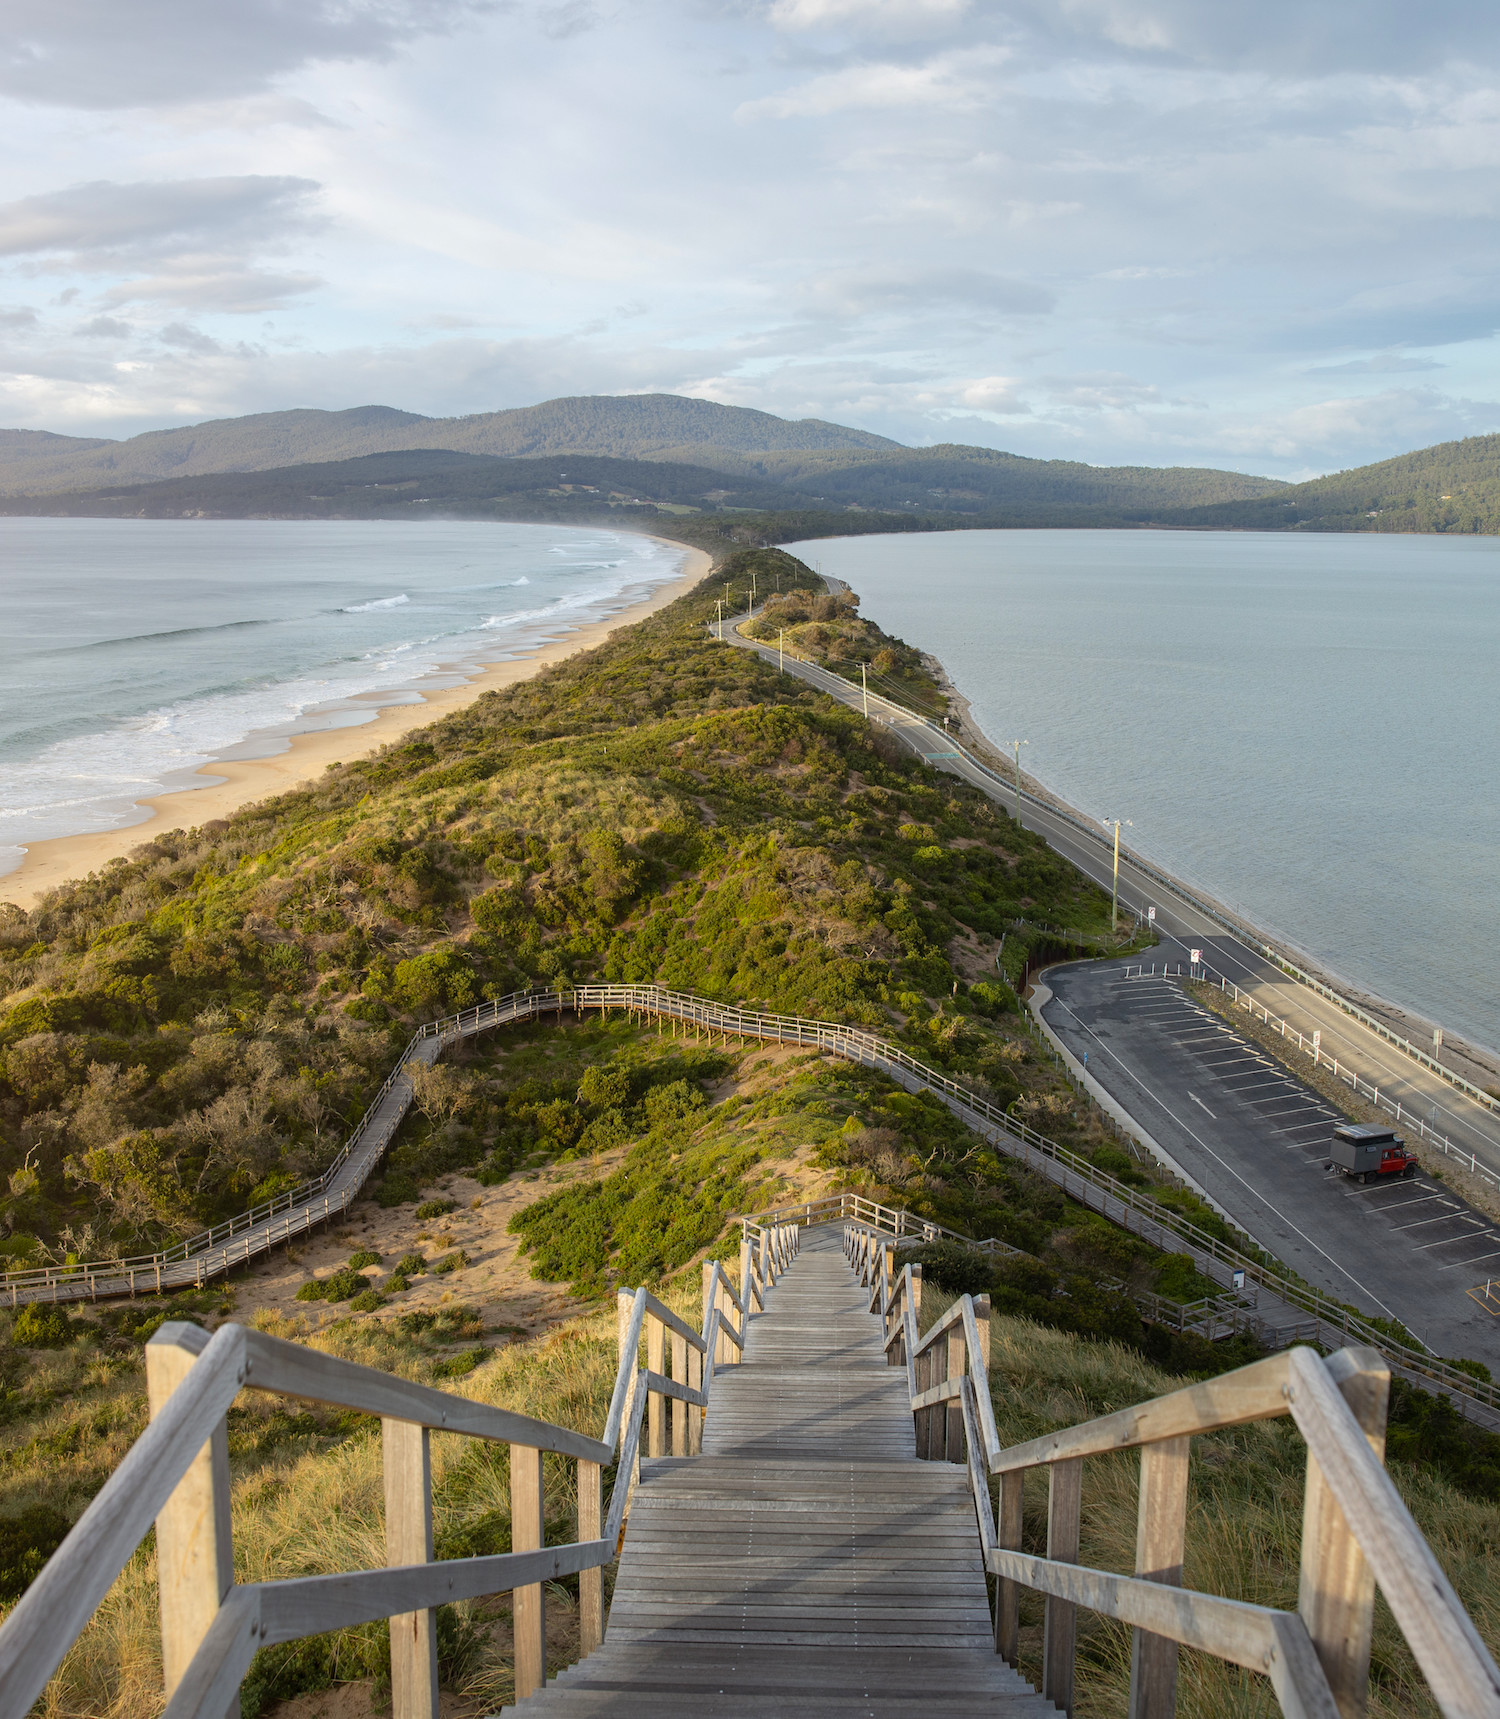 A shot from the top of the stairs at The Neck in Tasmania, Australia.